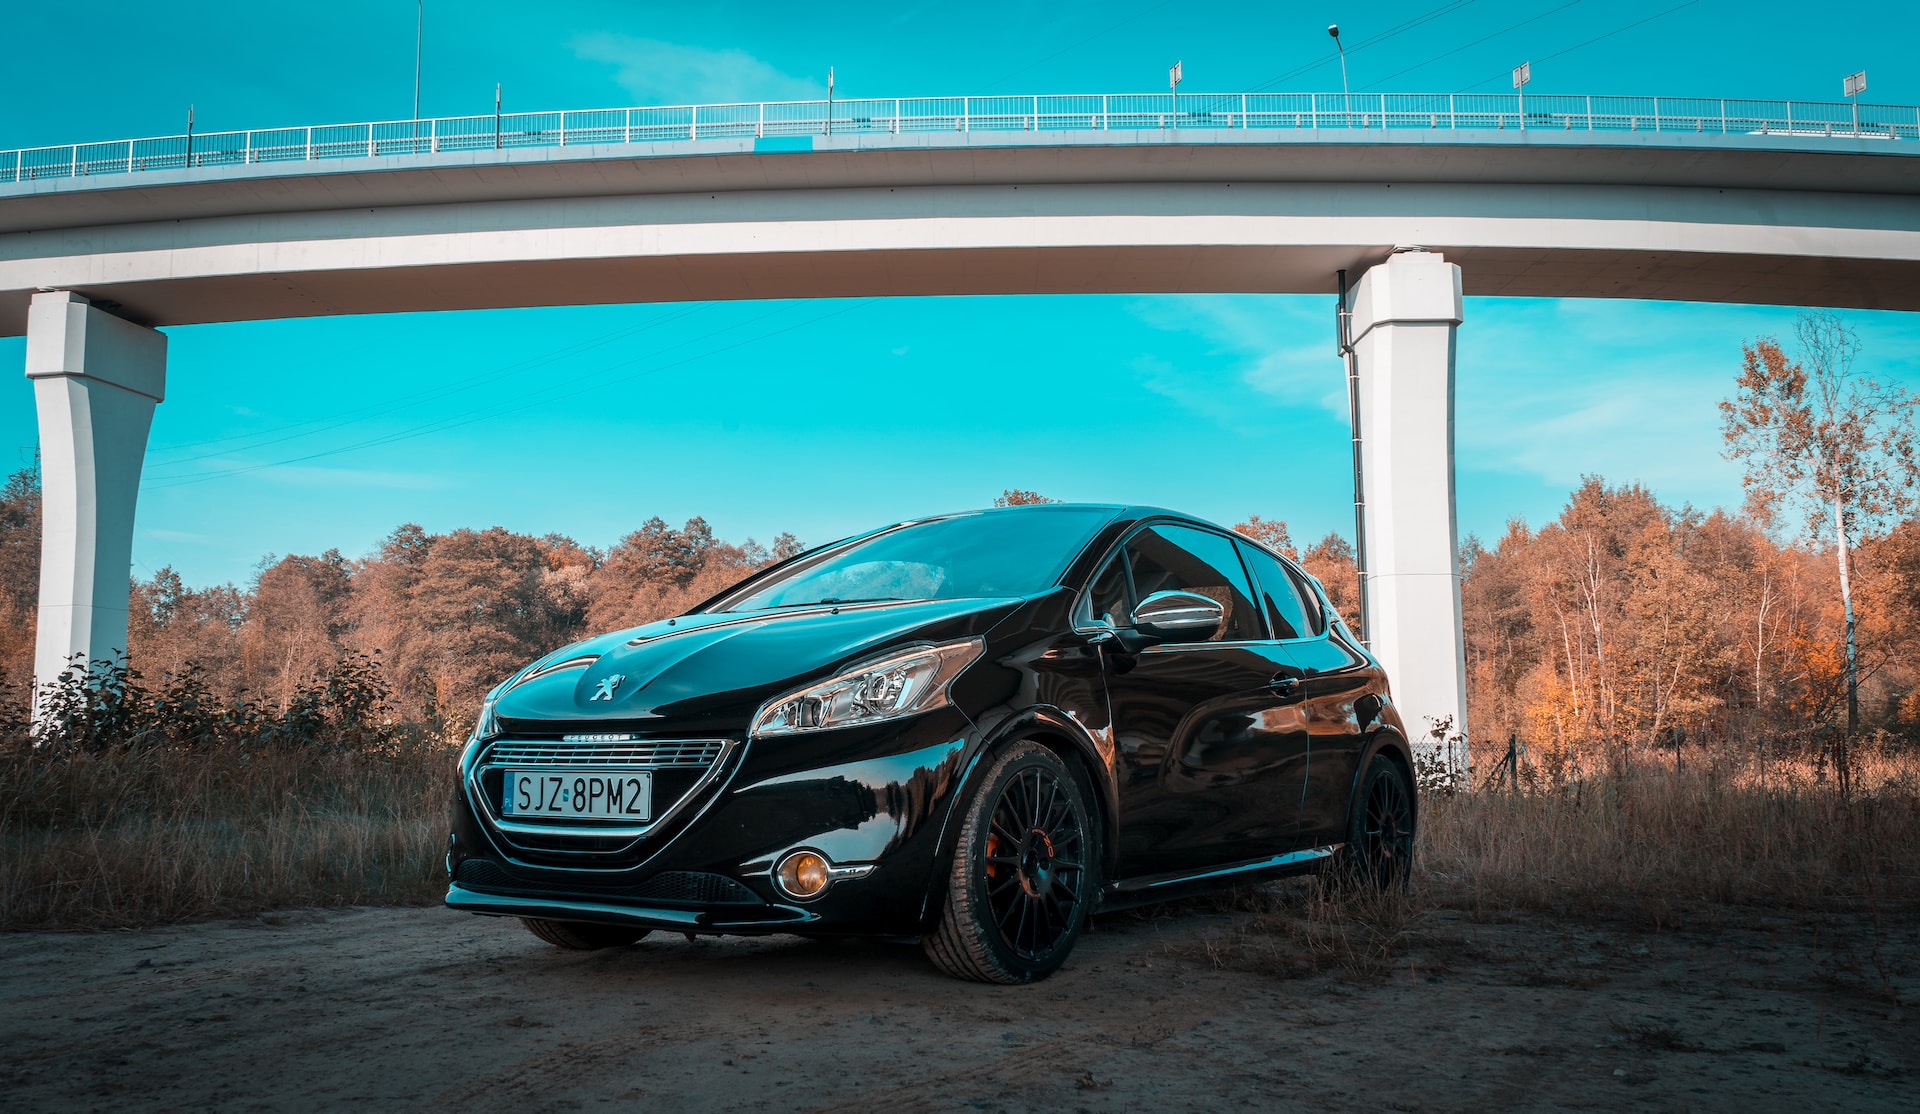 image of a black Peugeot with bridge and trees in background | Accenture Song and Peugeot